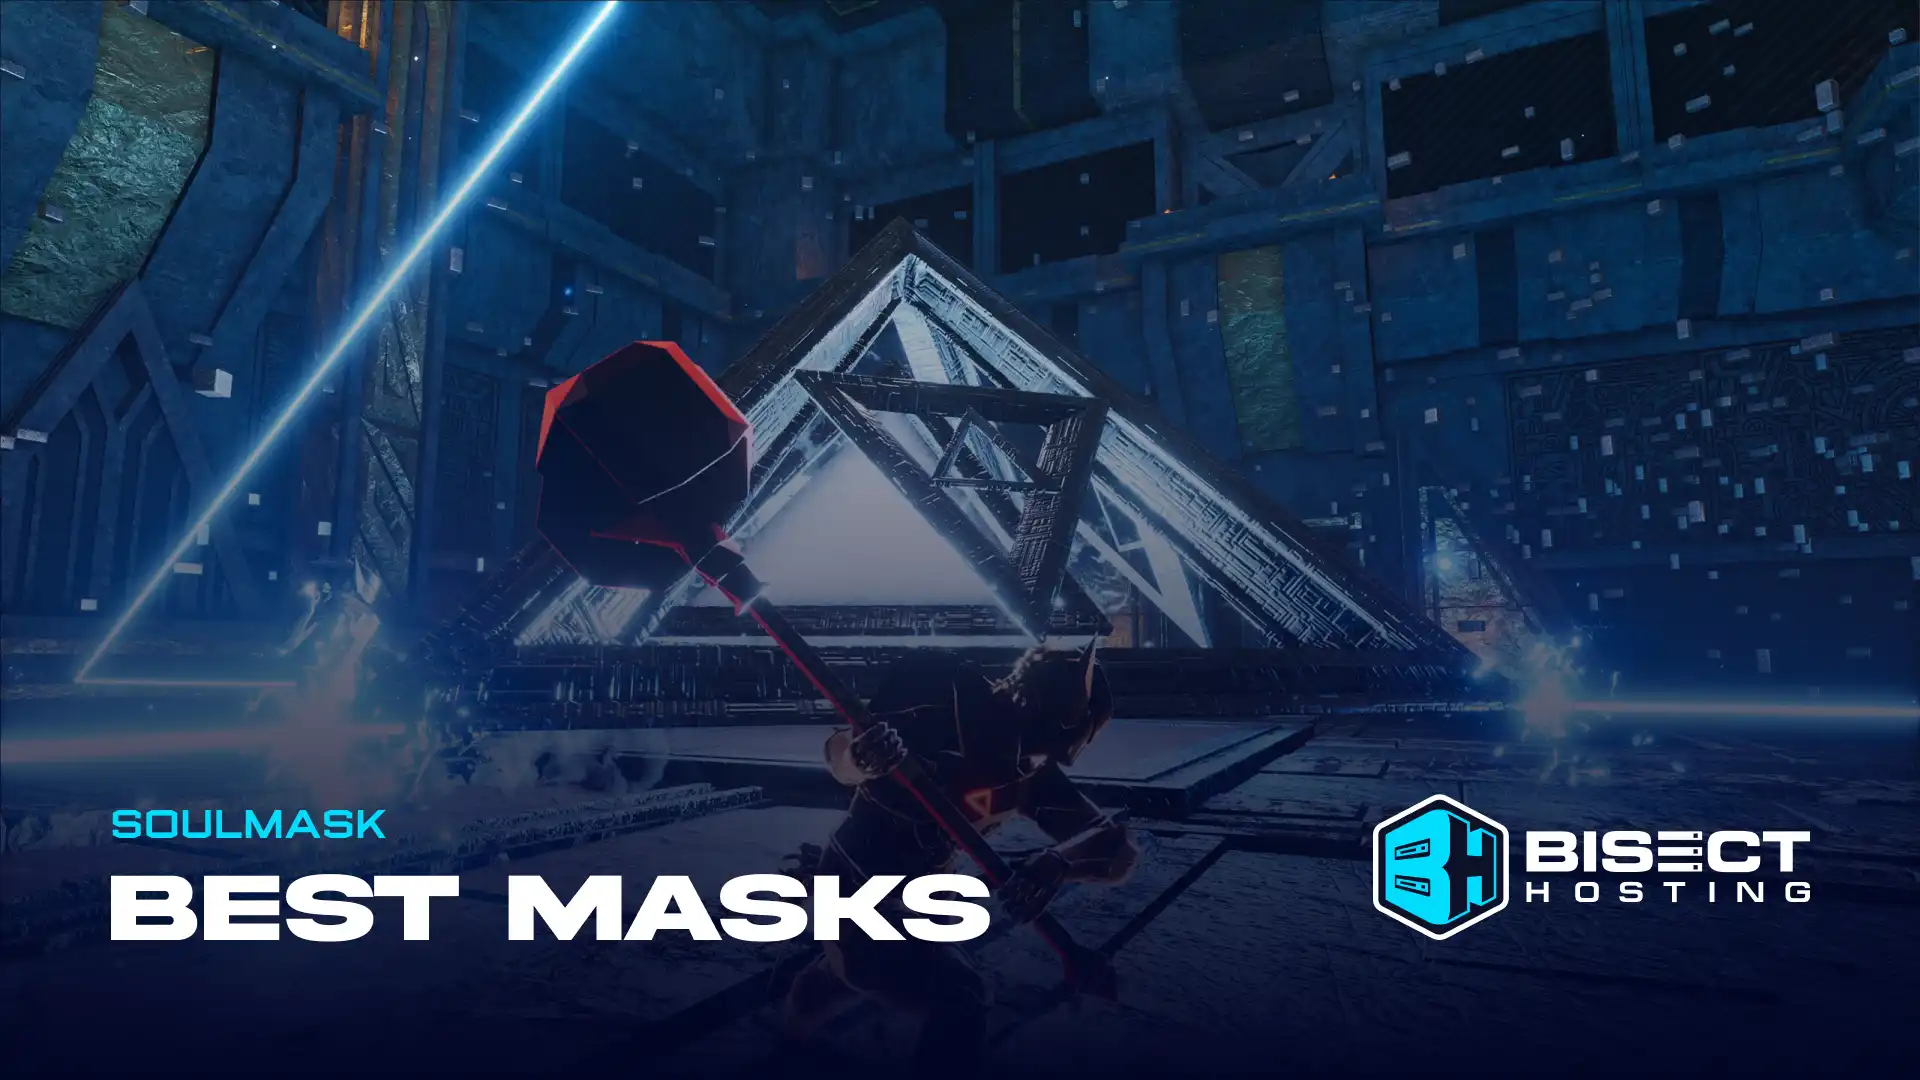 Ranking the Best Masks in Soulmask